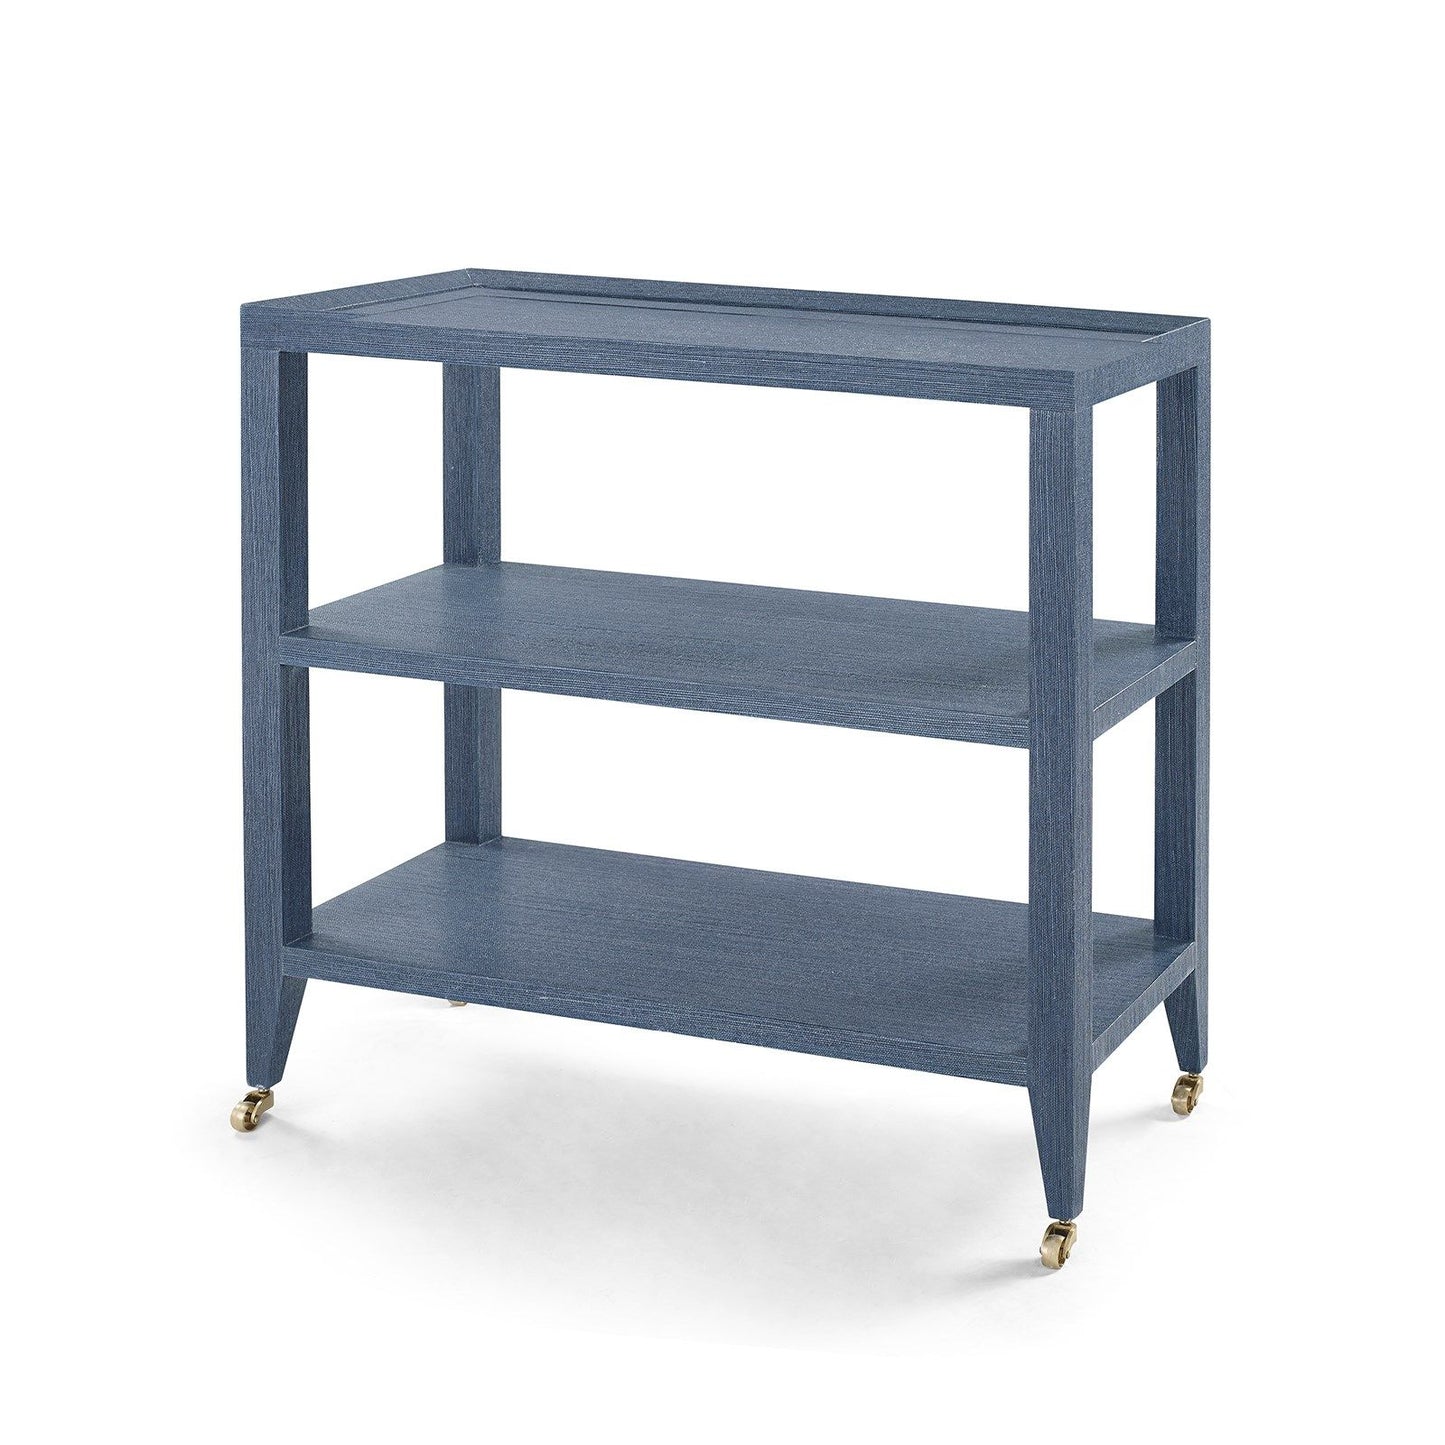 Load image into Gallery viewer, Isadora Console Table Navy BlueTable Bungalow 5  Navy Blue   Four Hands, Burke Decor, Mid Century Modern Furniture, Old Bones Furniture Company, Old Bones Co, Modern Mid Century, Designer Furniture, https://www.oldbonesco.com/
